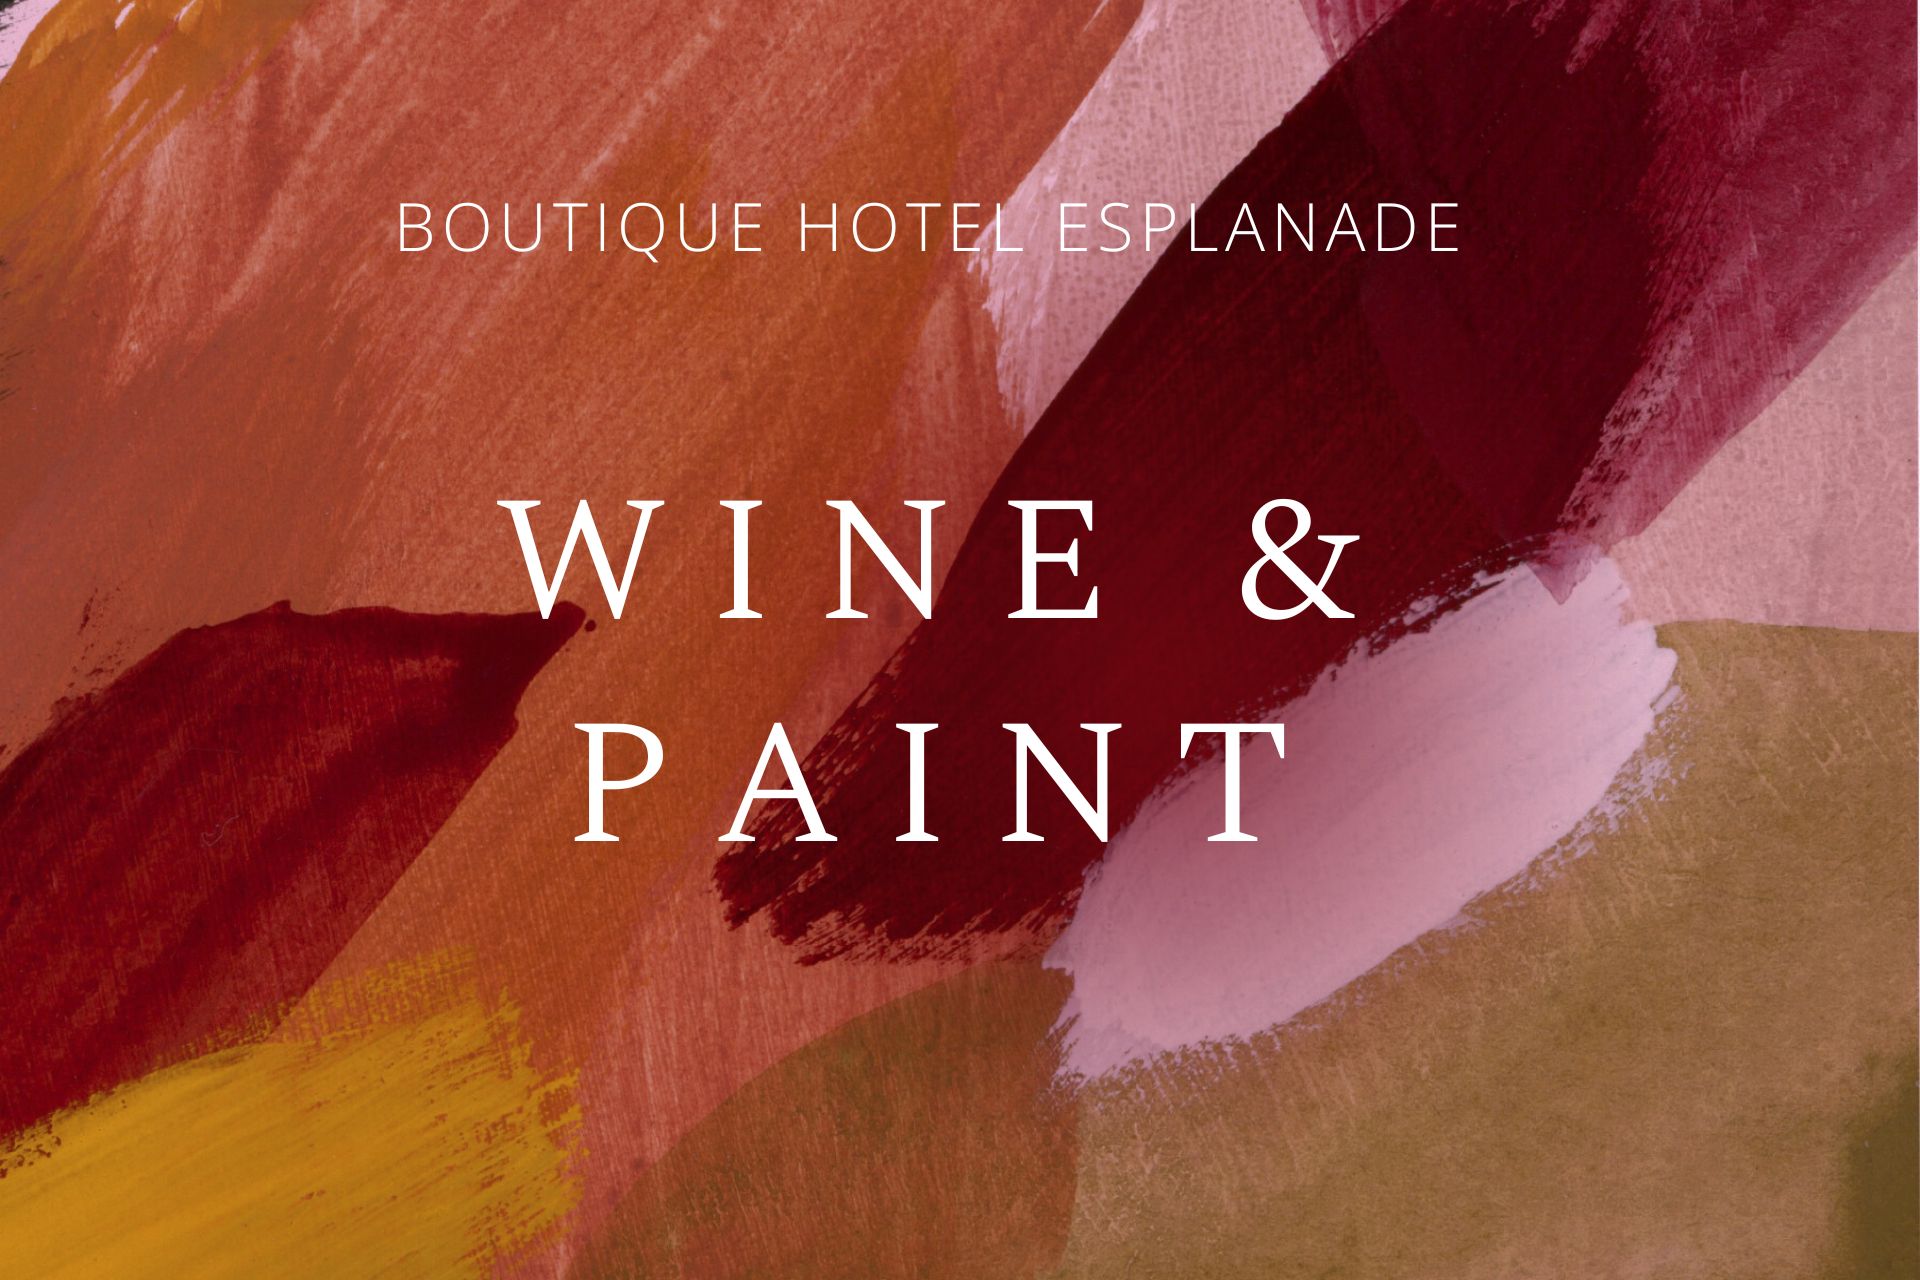 We invite you to a unique "Wine & Paint" event at the Boutique Hotel Esplanade